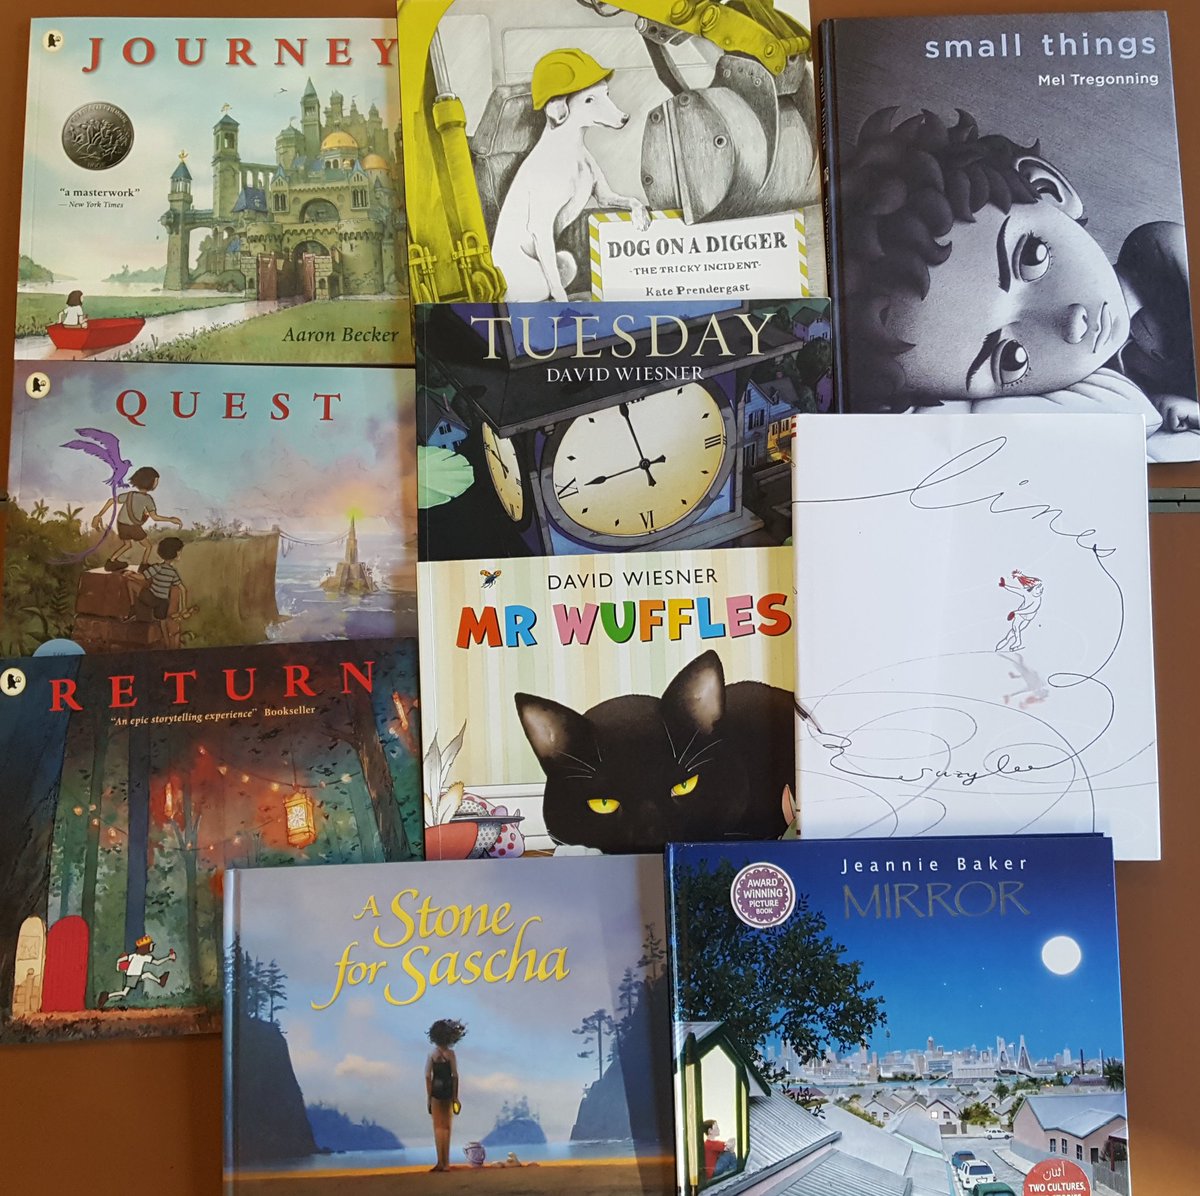 Went off track slightly today, we shared lots of wordless picturebooks for our  #PicturebookADay. Great to see the class discussing how the stories are constructed and how they would tell them.